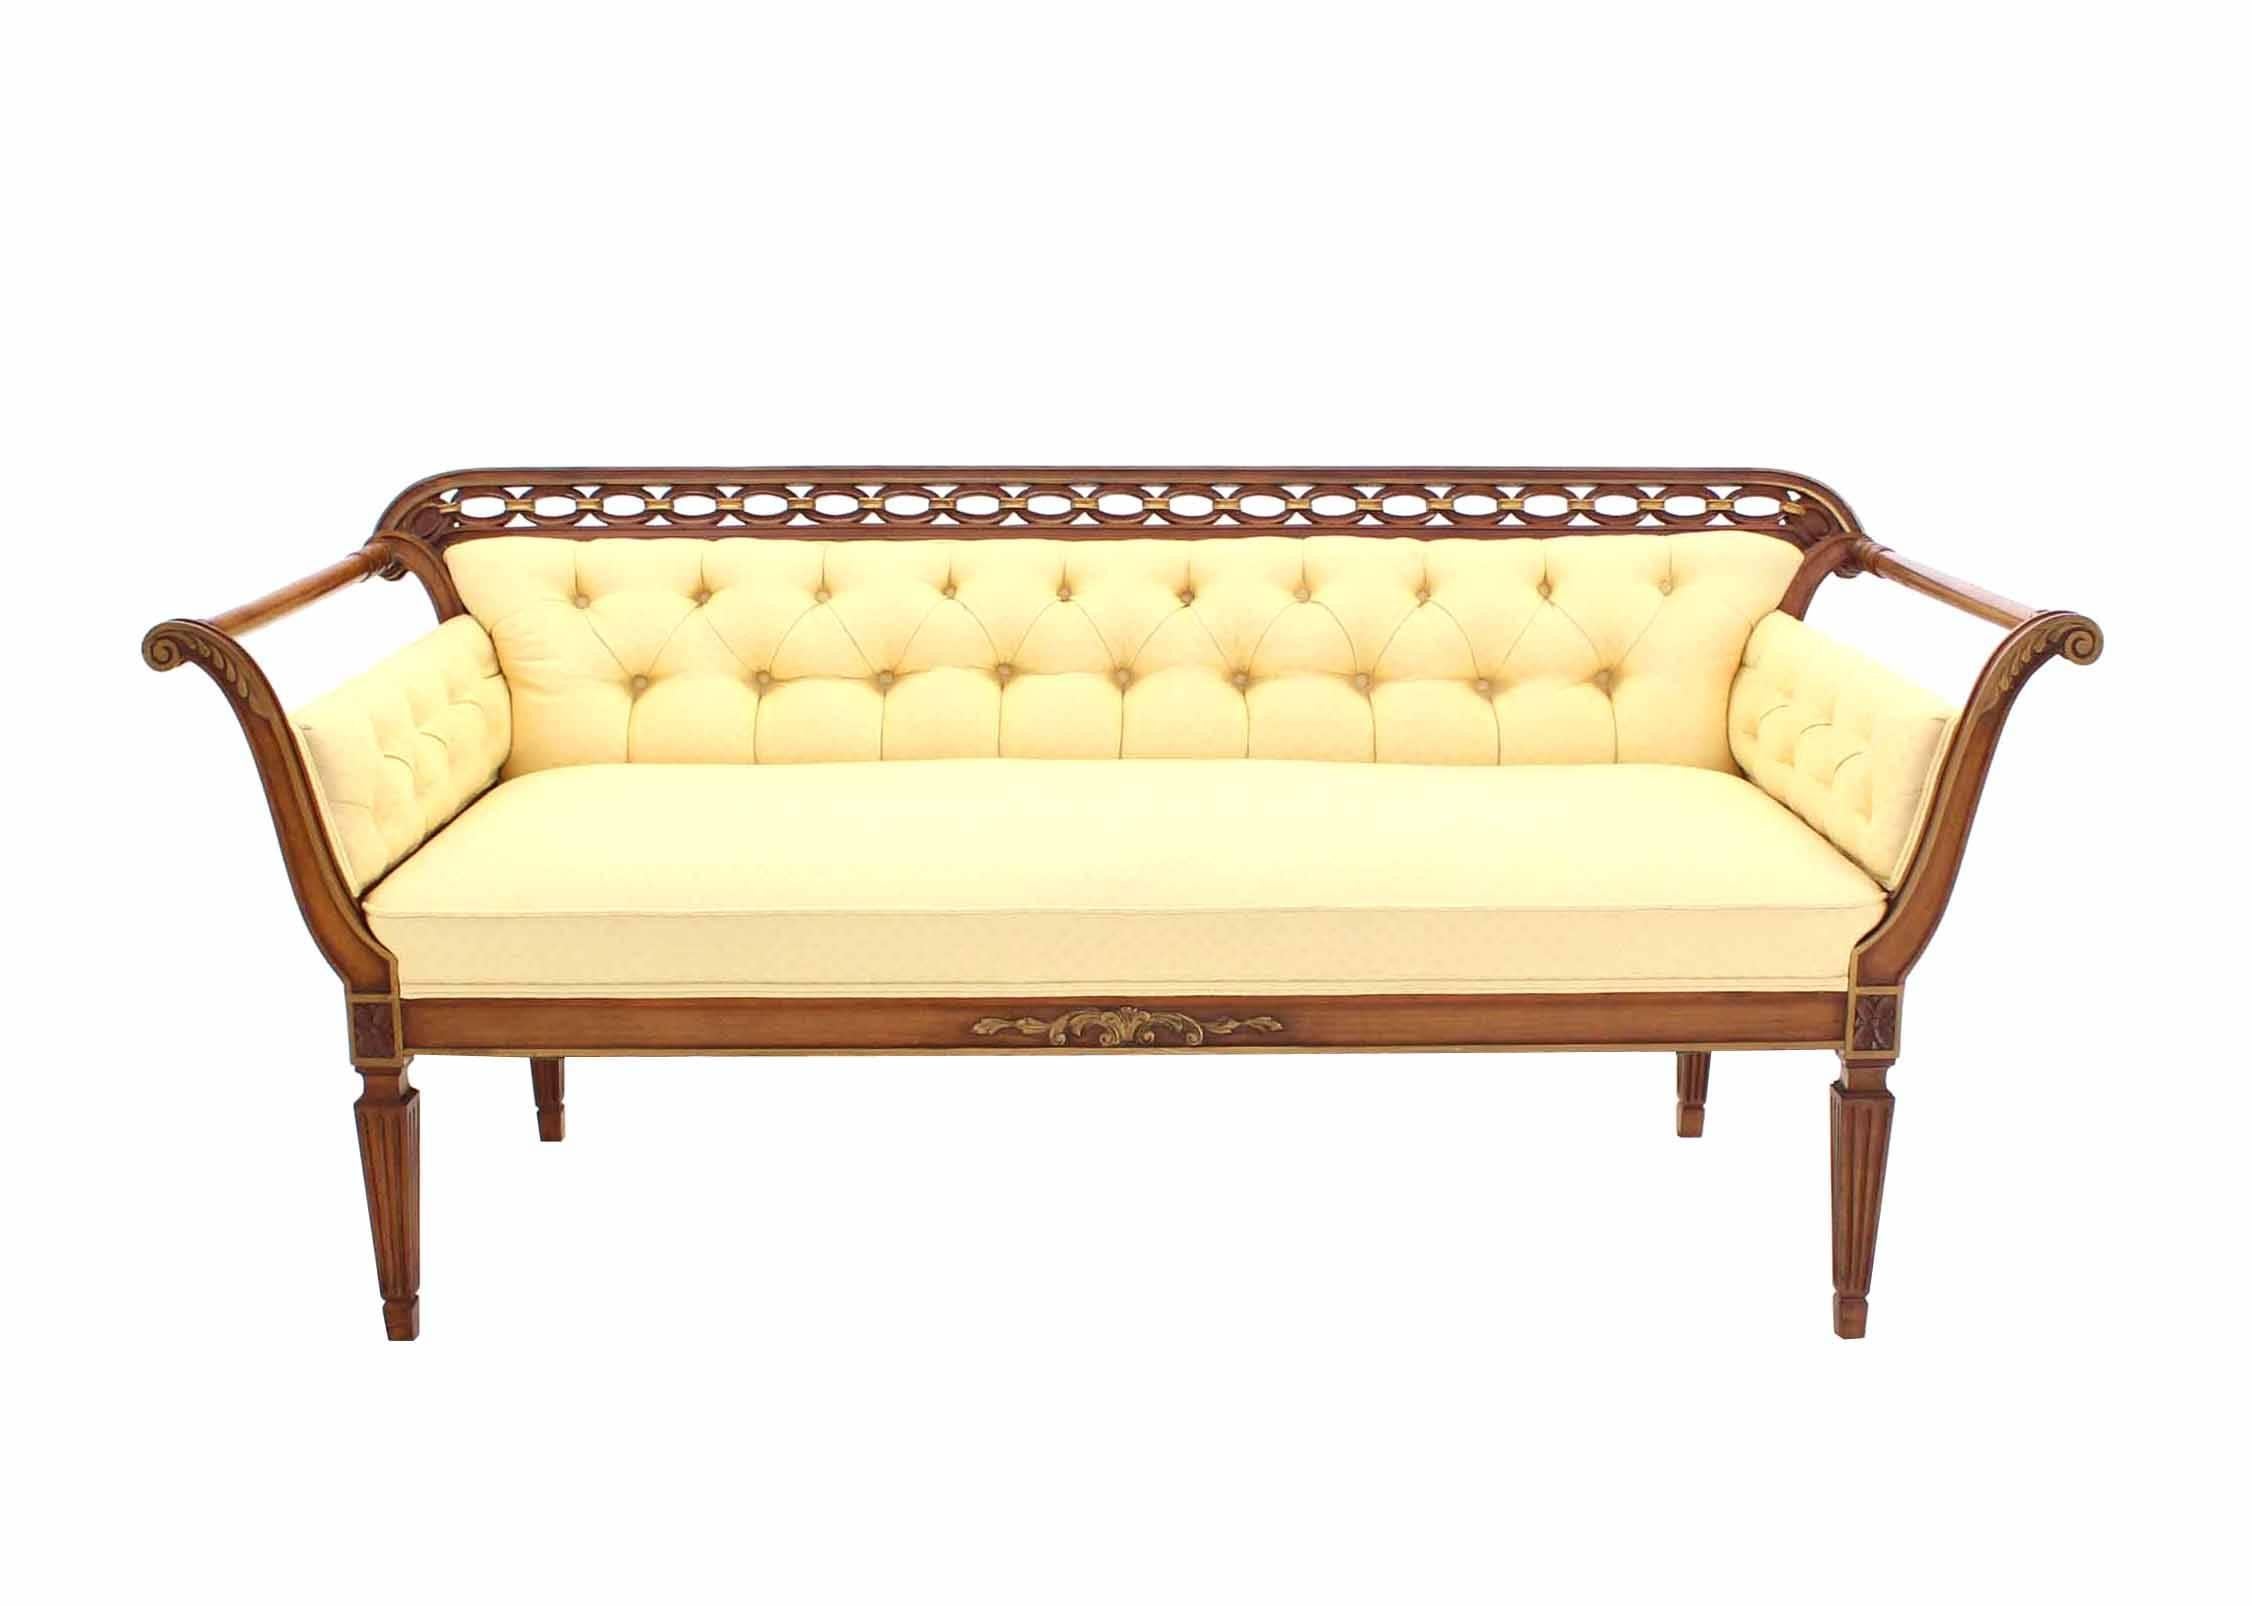 American Pair of Regency Style Sofas or Loveseats Gold Upholstery